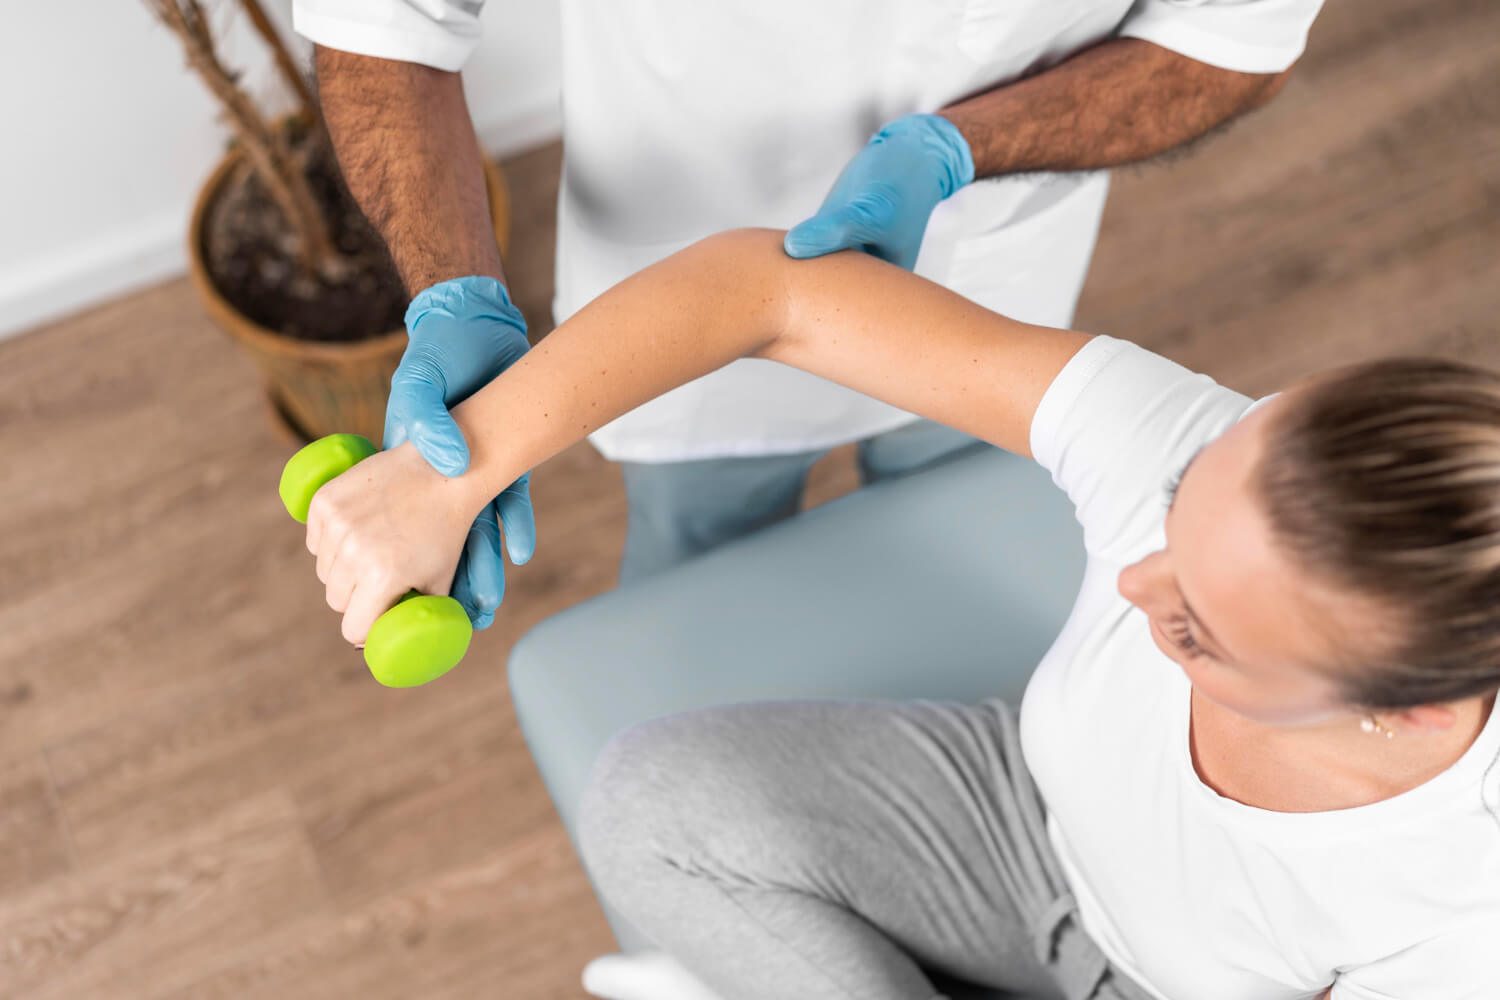 a physio helping a woman with tennis elbow rehabilitation exercises